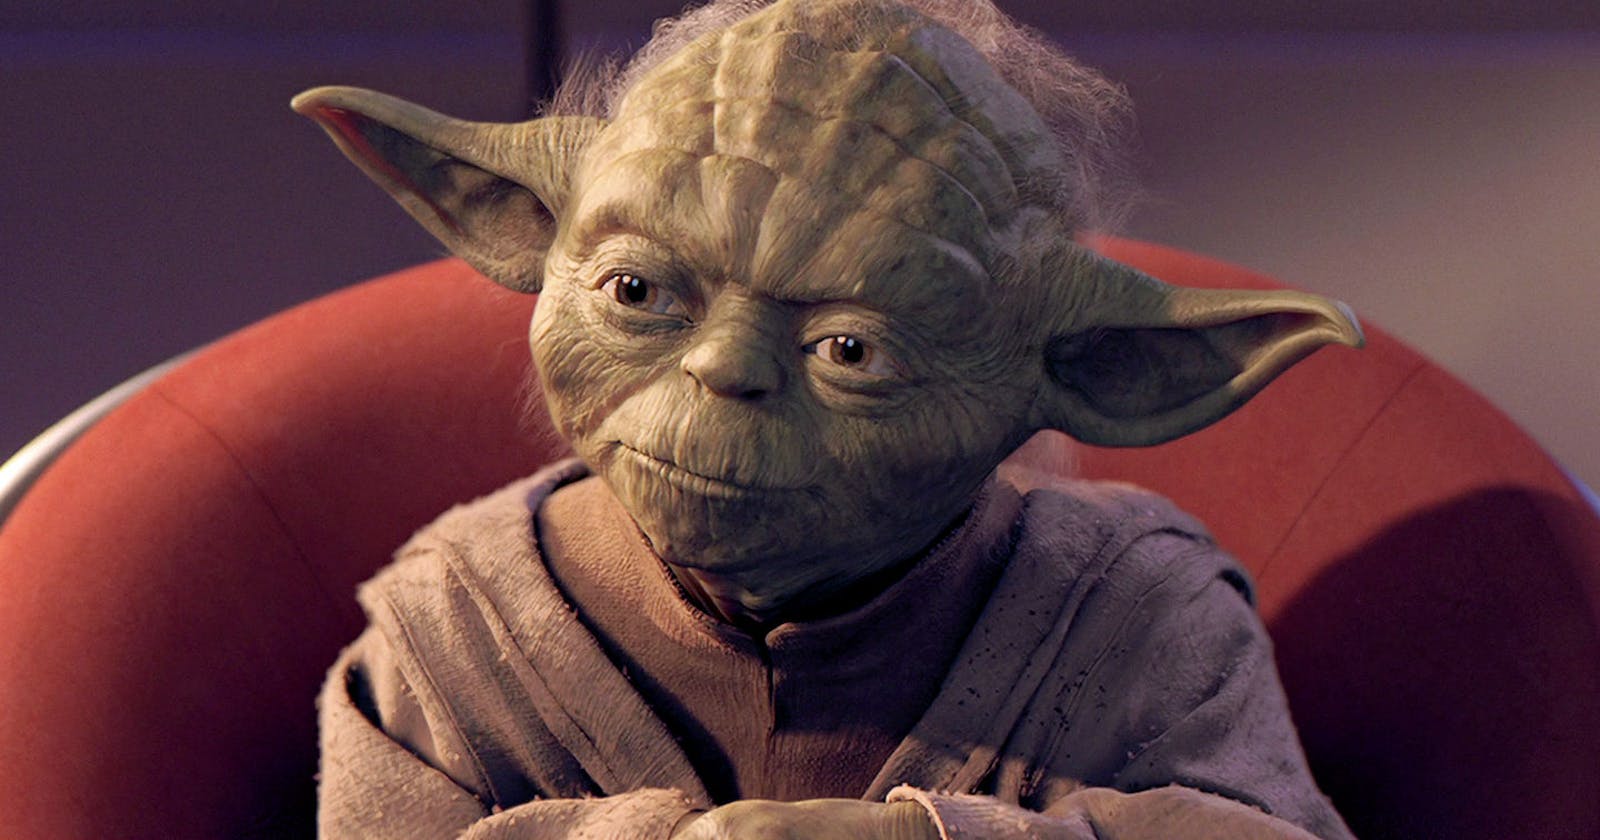 How Yoda can inspire Network engineers and developers learning everyday